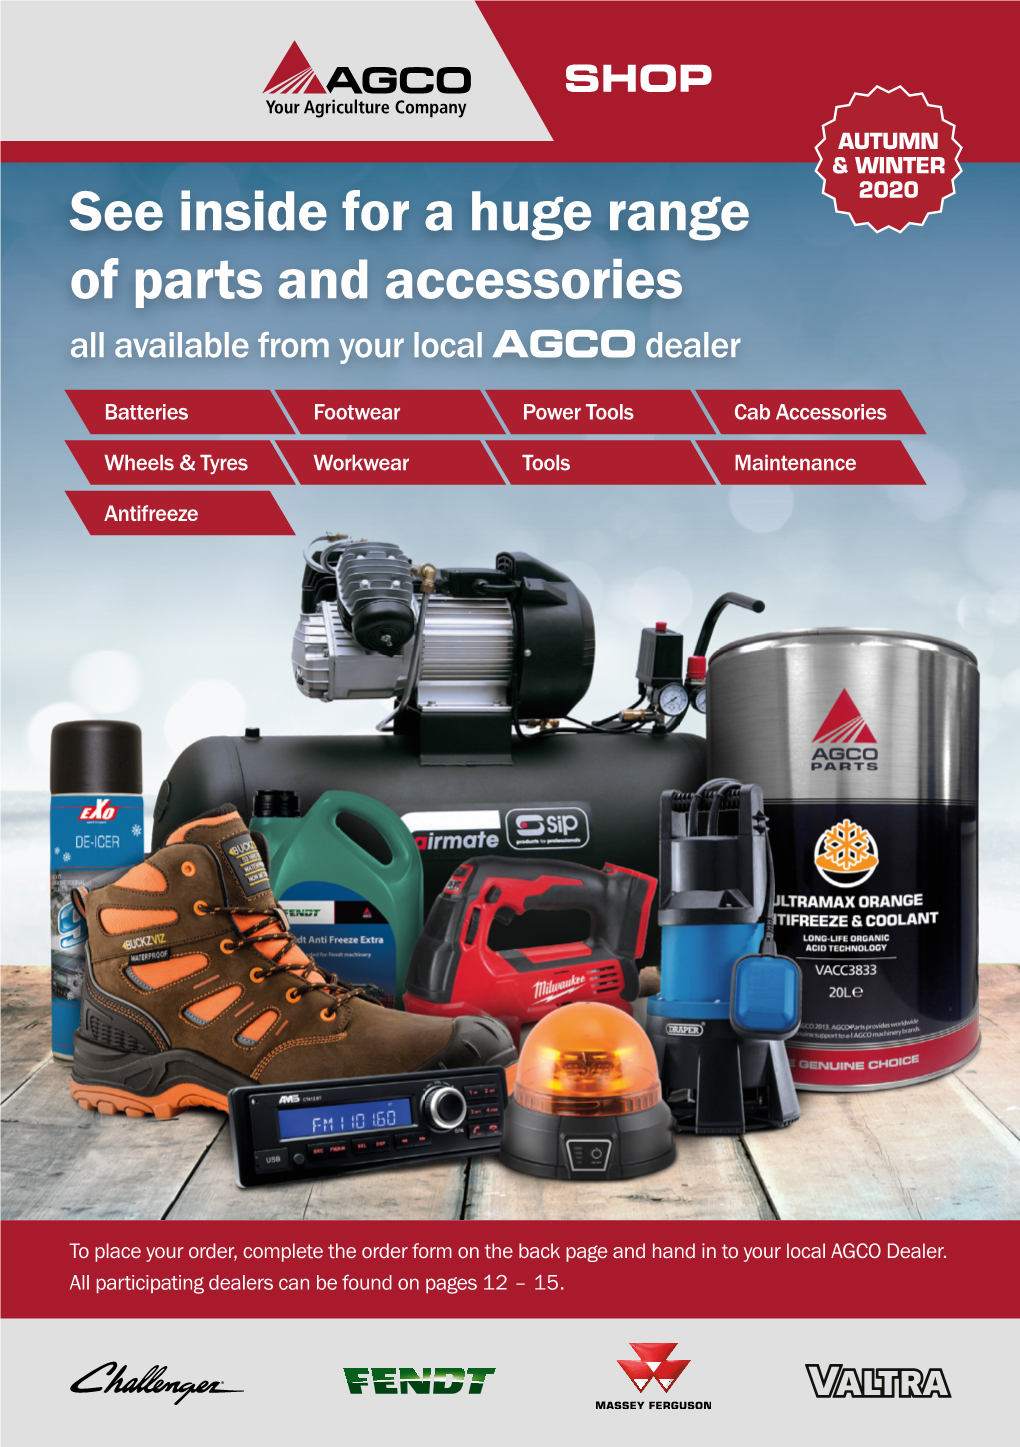 See Inside for a Huge Range of Parts and Accessories